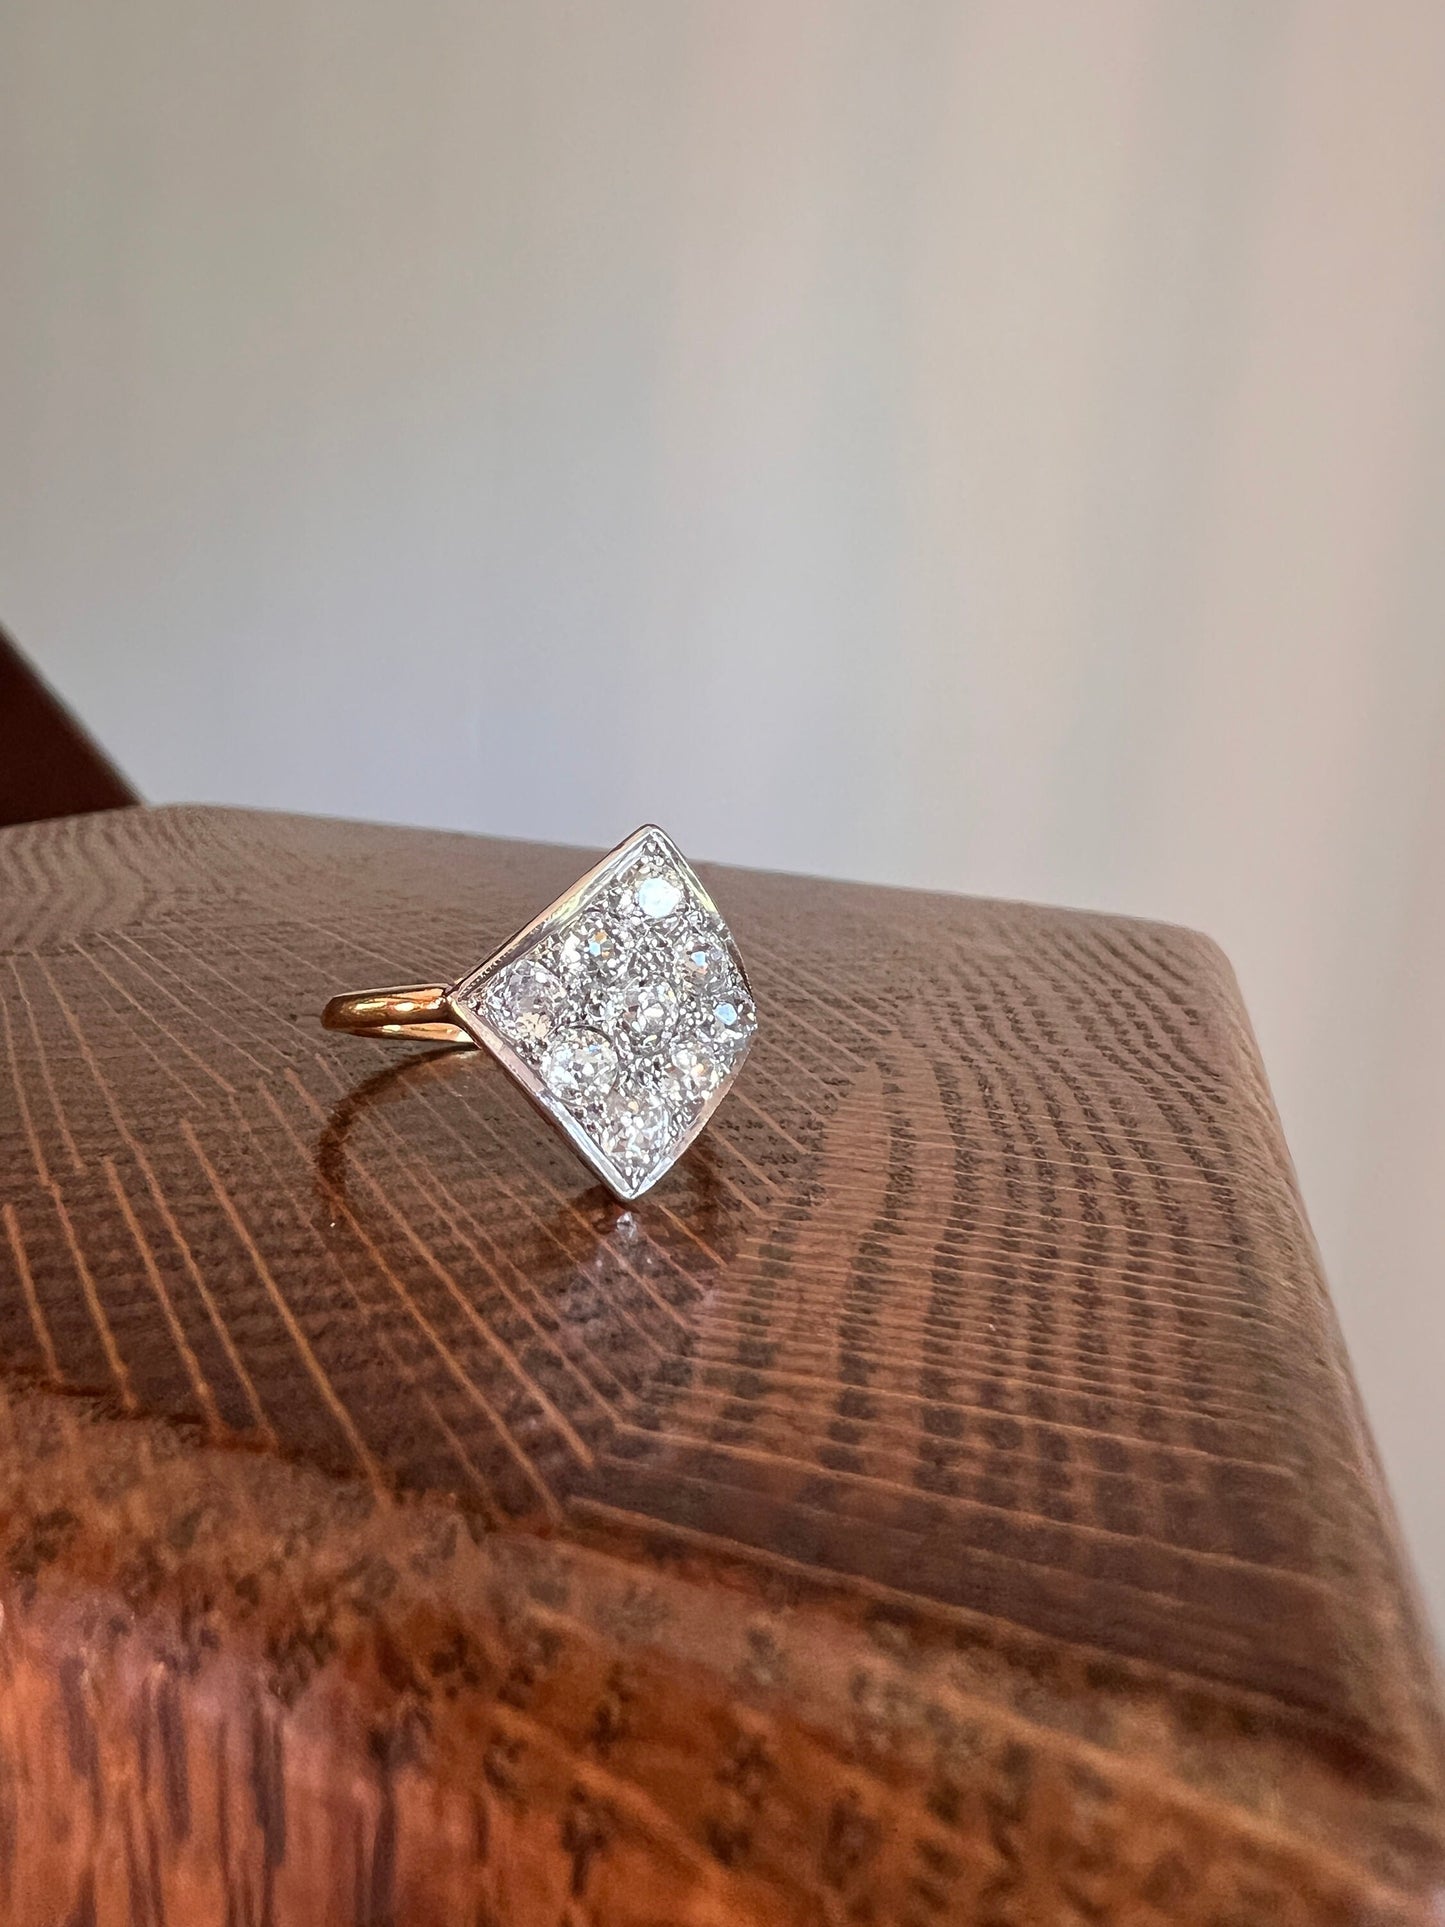 CURVED Unique 1.25 Carat Nine Old Mine Cut DIAMOND Cluster Kite Grid Ring French Antique 18k Gold Geometric Stacker Cobblestone Texture Gift